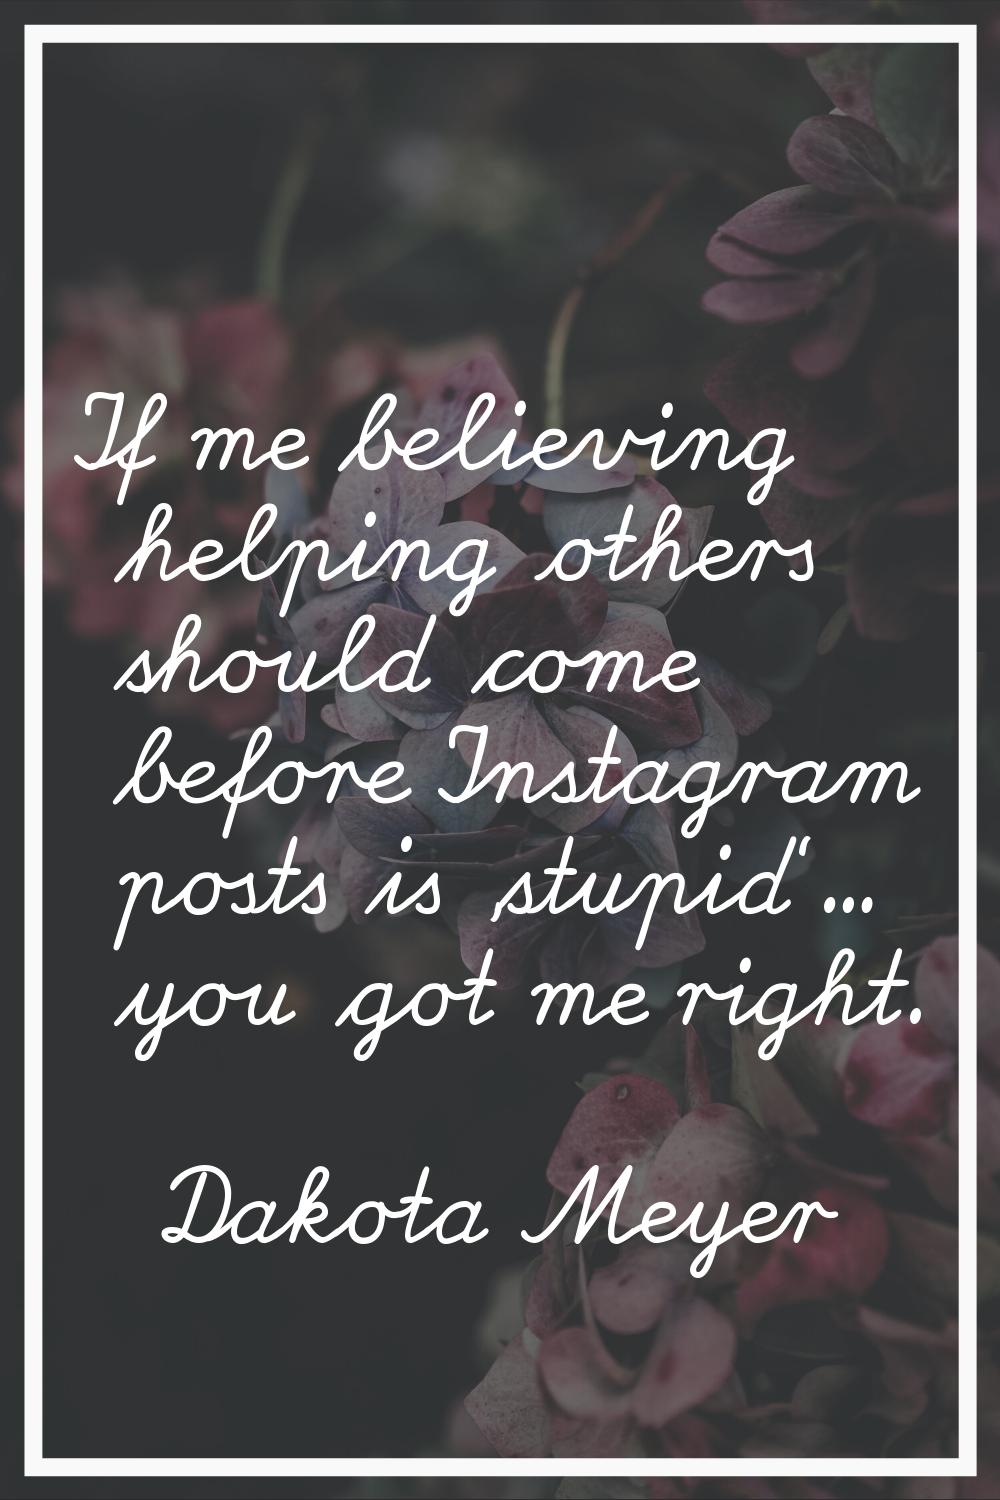 If me believing helping others should come before Instagram posts is 'stupid'... you got me right.